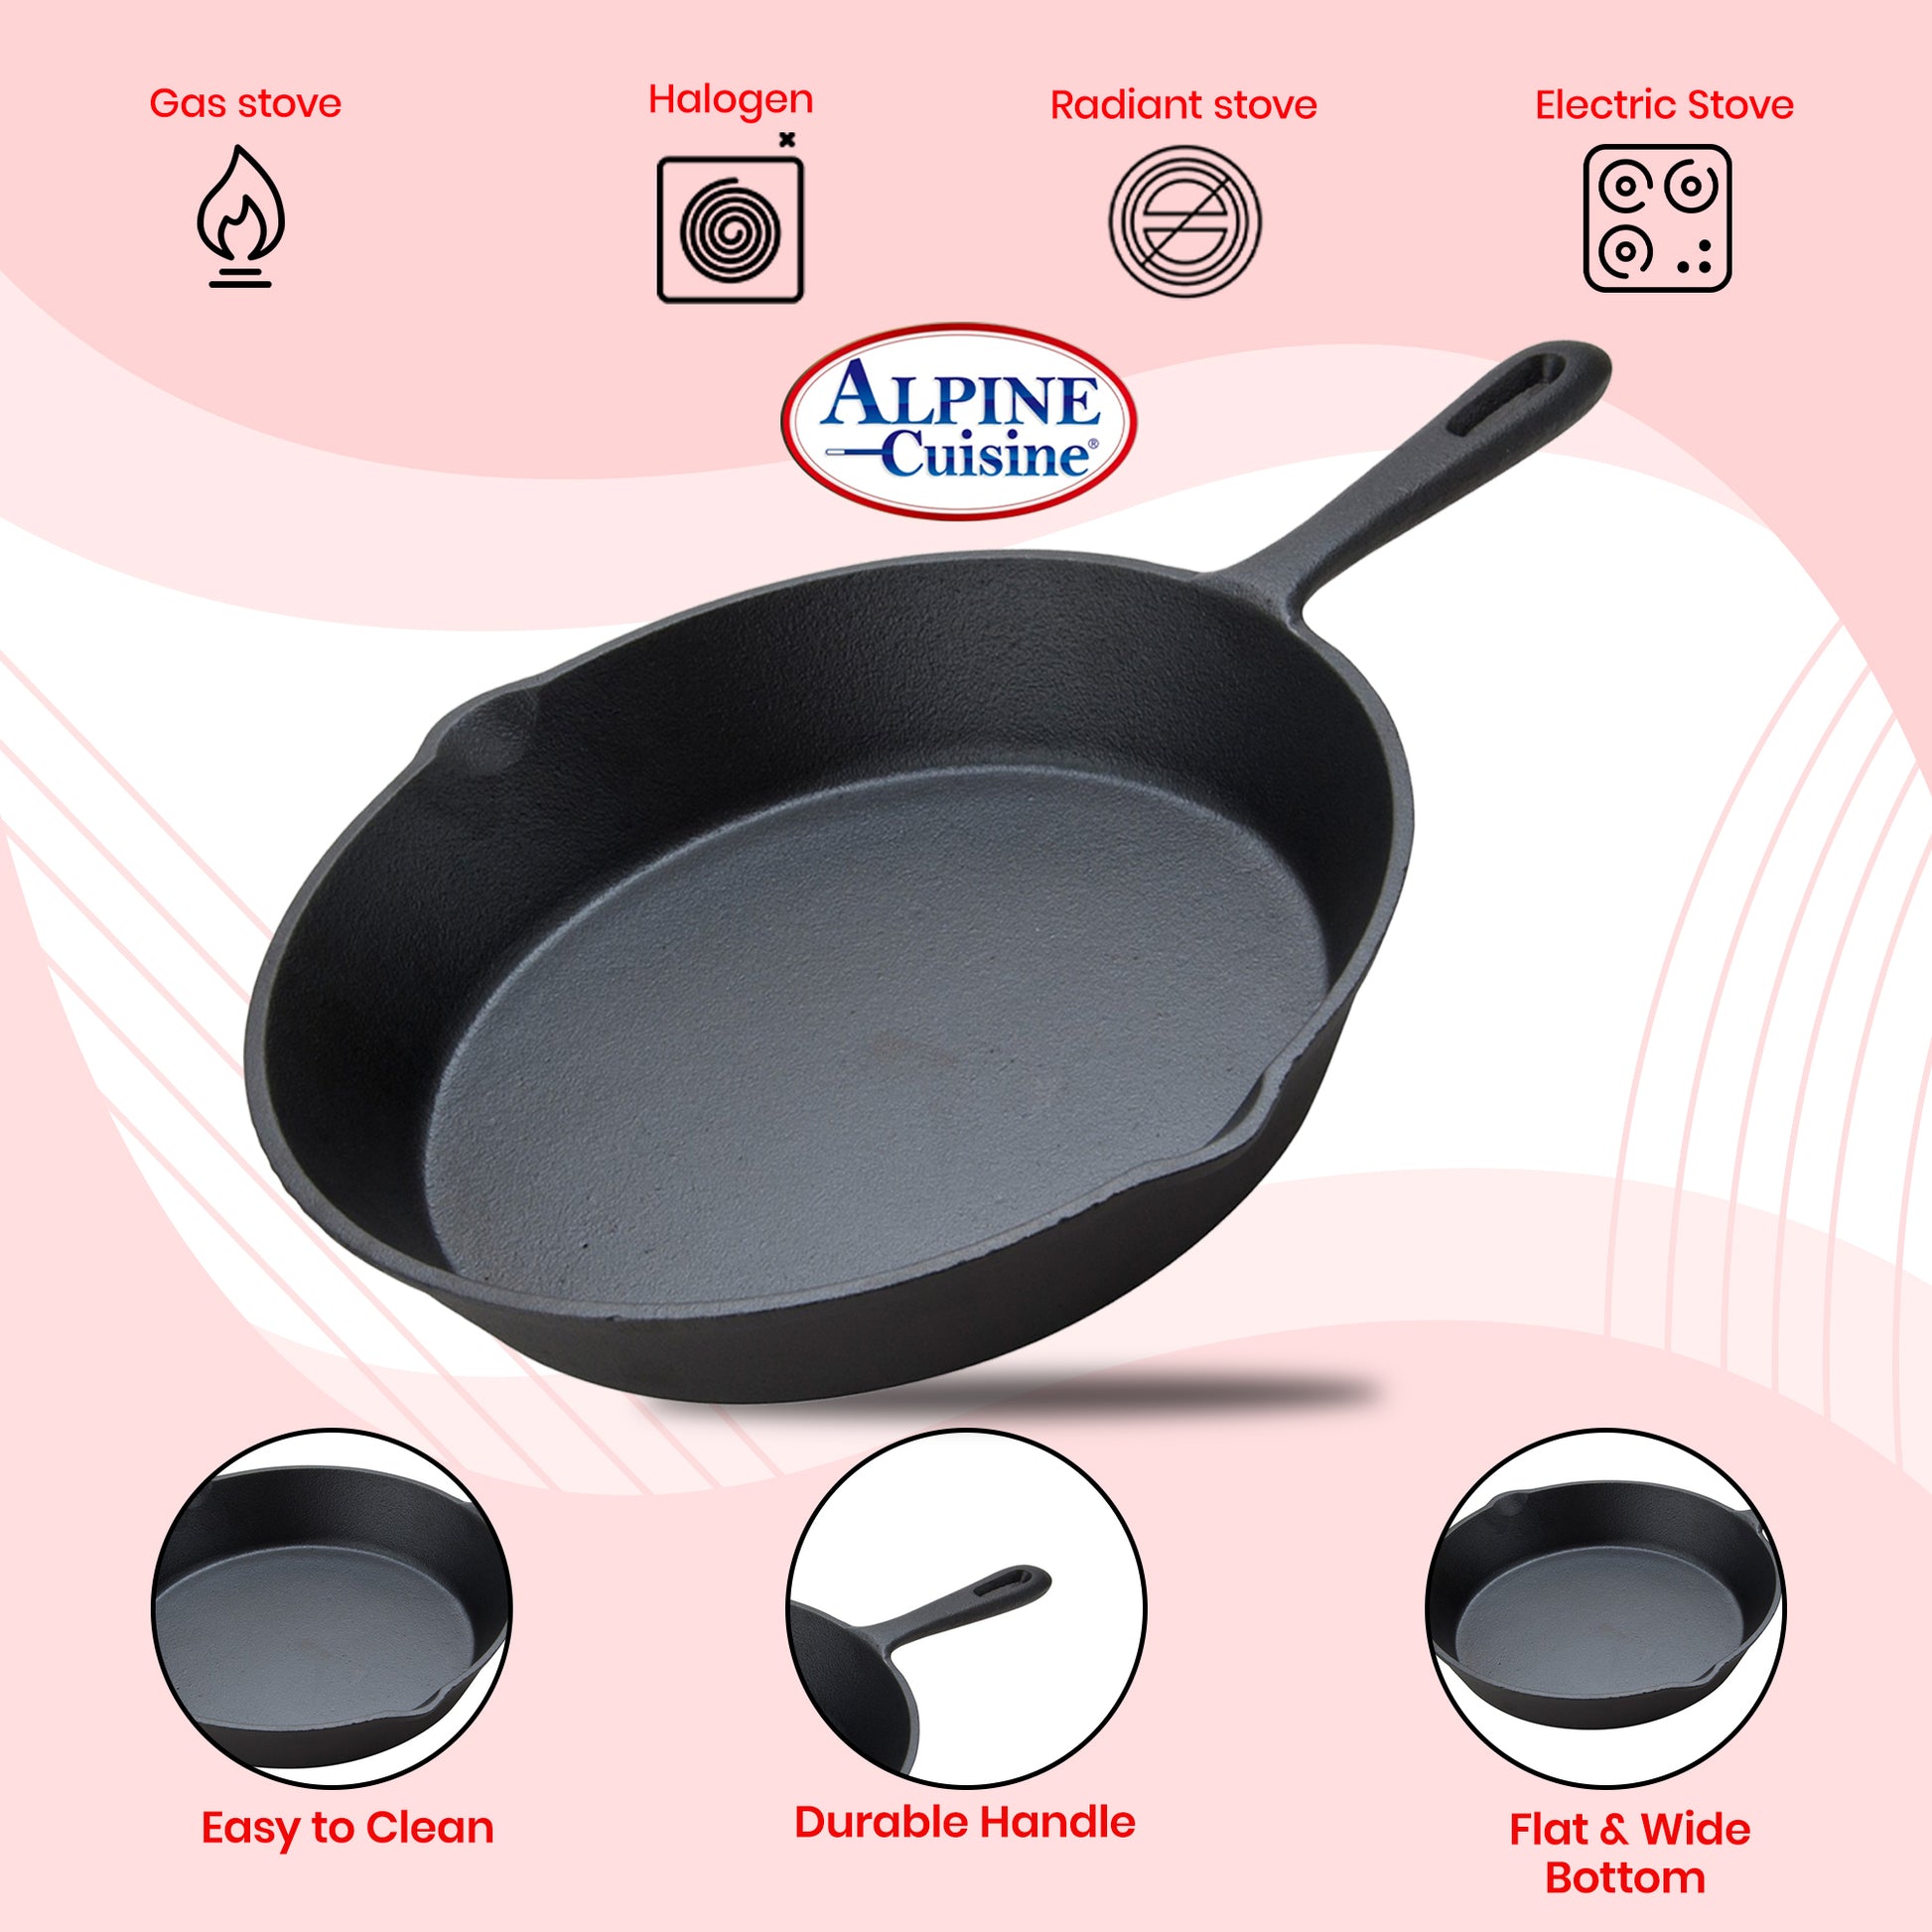 Alpine Cuisine Fry Pan 12-Inch Nonstick Coating Gray, Frying Pans Nonstick  for Stove with Stay Cool & Comfortable Handle, Durable Nonstick Cookware